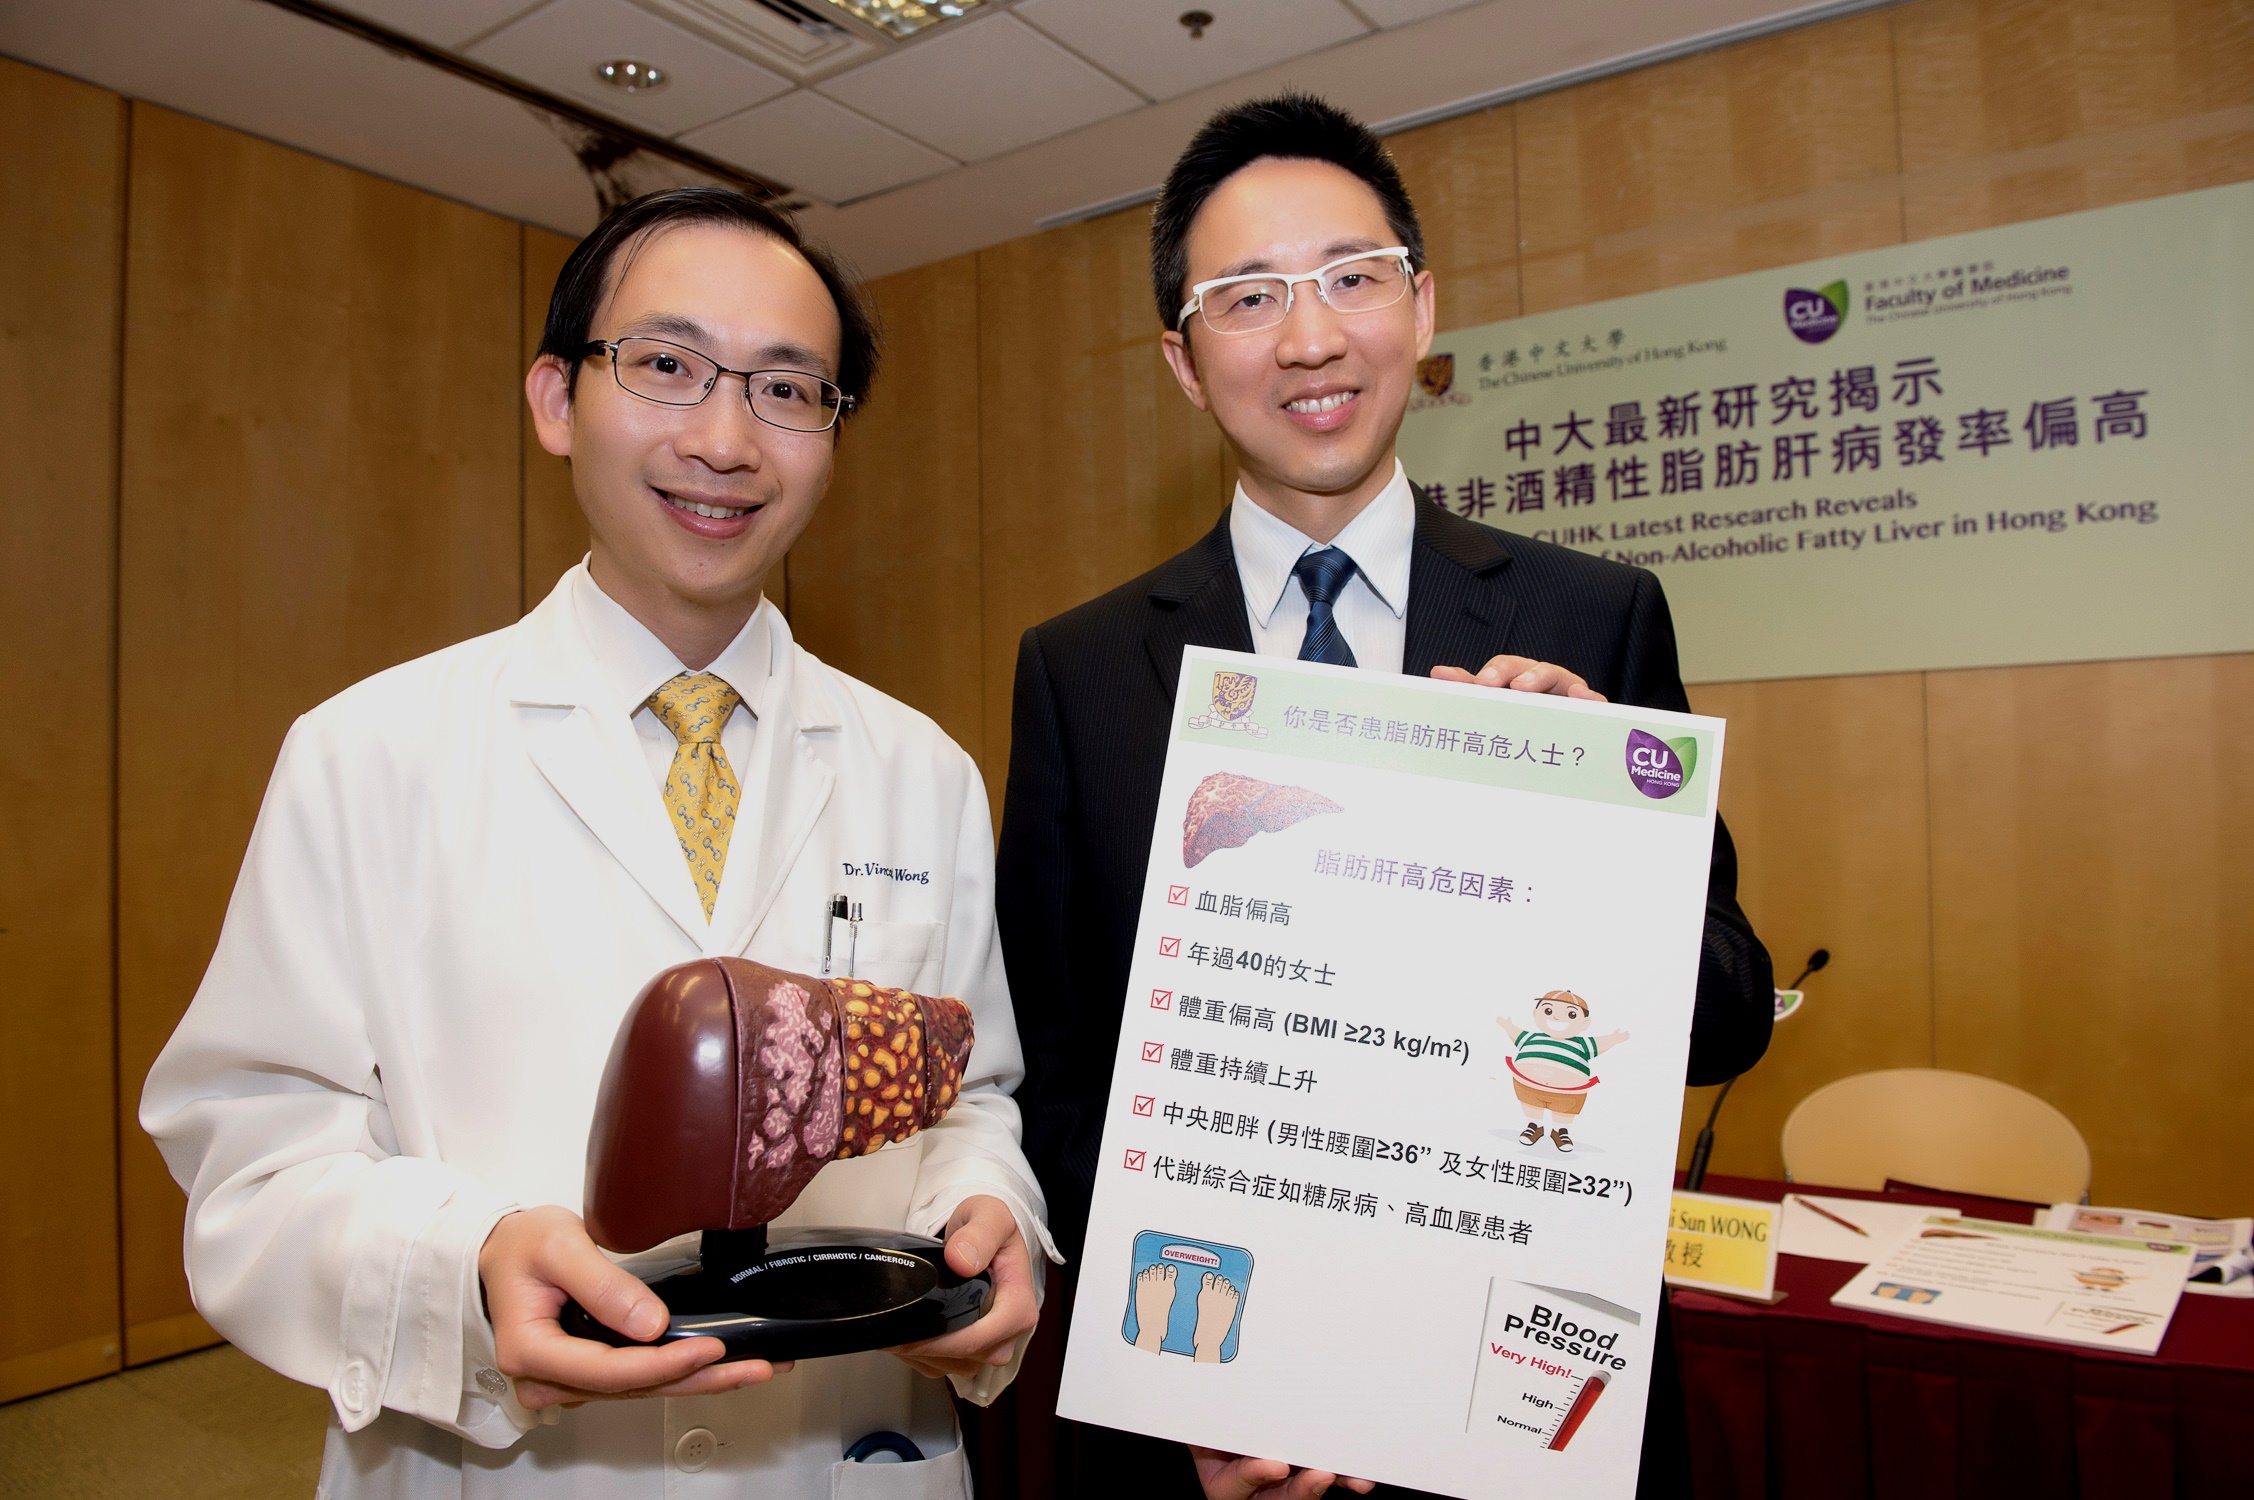 Prof. Henry Chan, Head of the Division of Gastroenterology and Hepatology